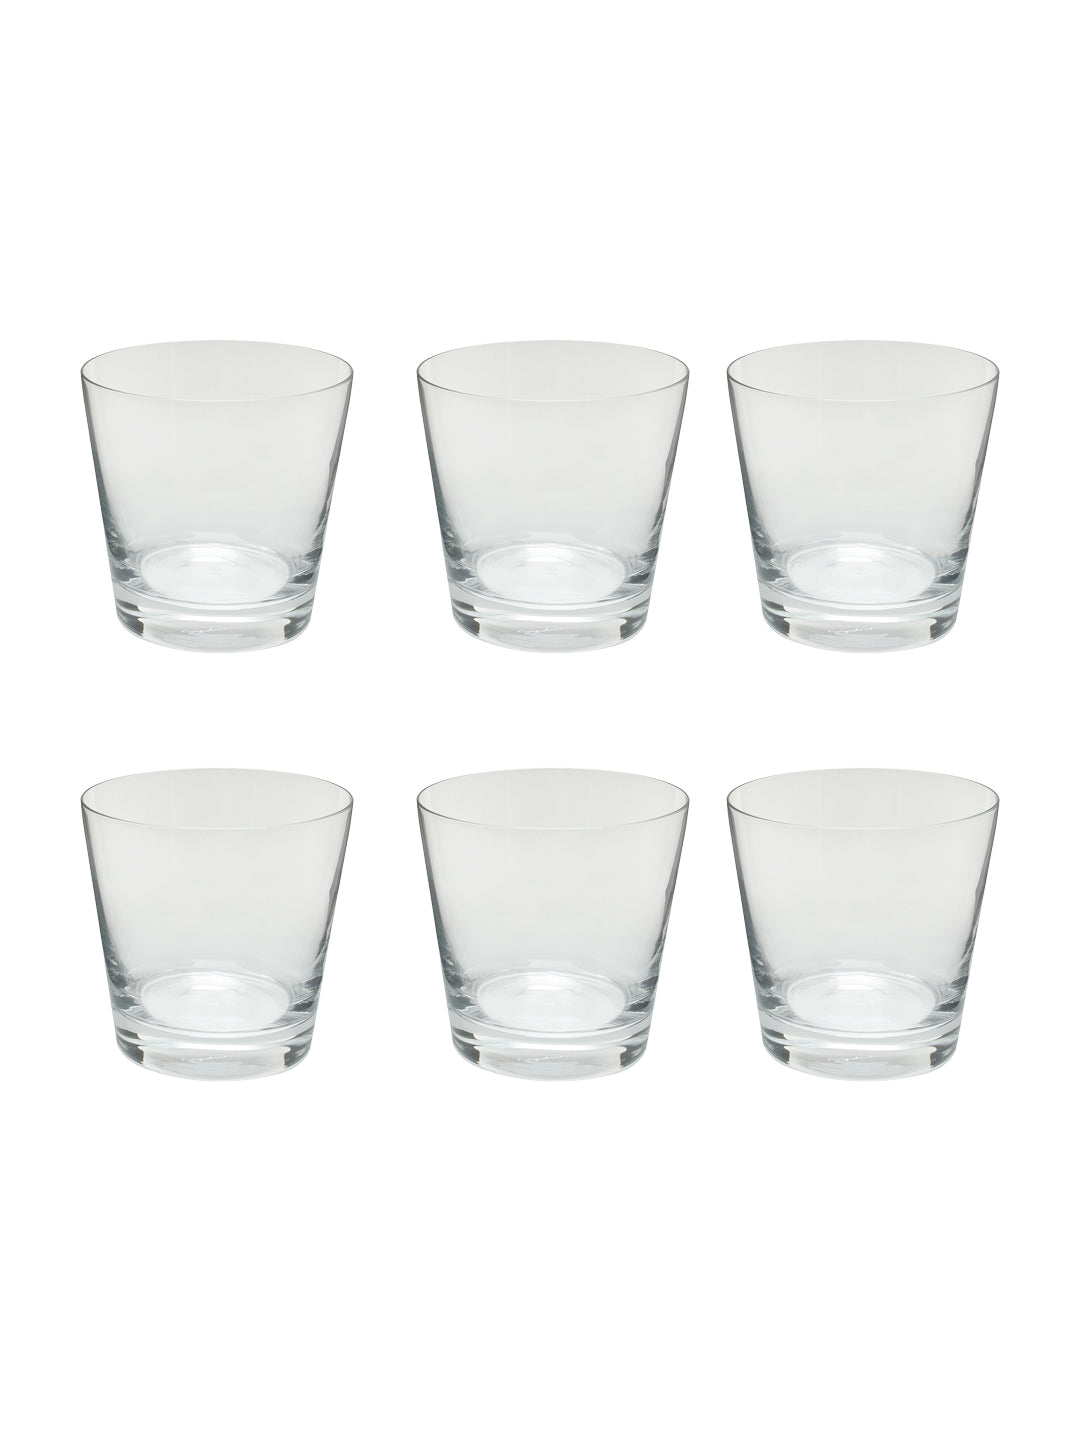 Modern whiskey glass perfect for keeping drinks at ideal temperature